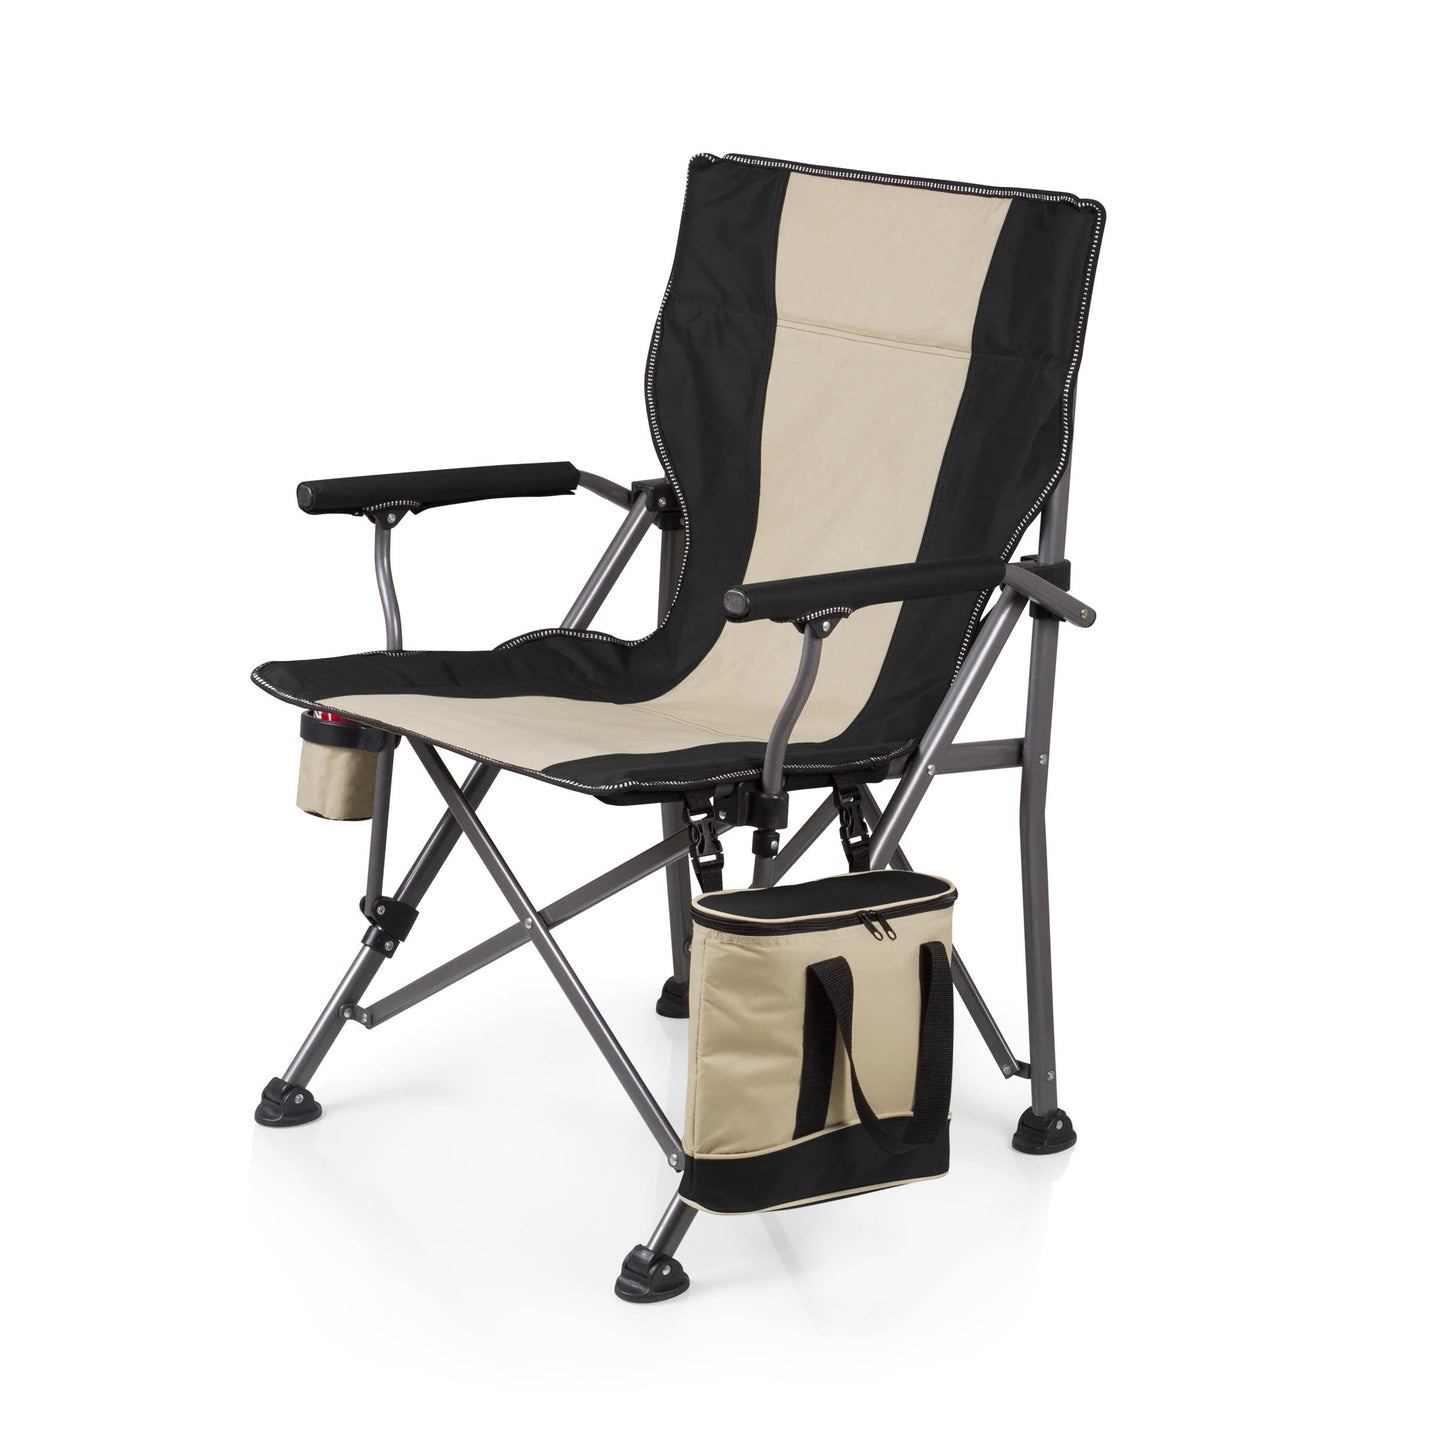 Pittsburgh Steelers - Outlander Folding Camping Chair with Cooler